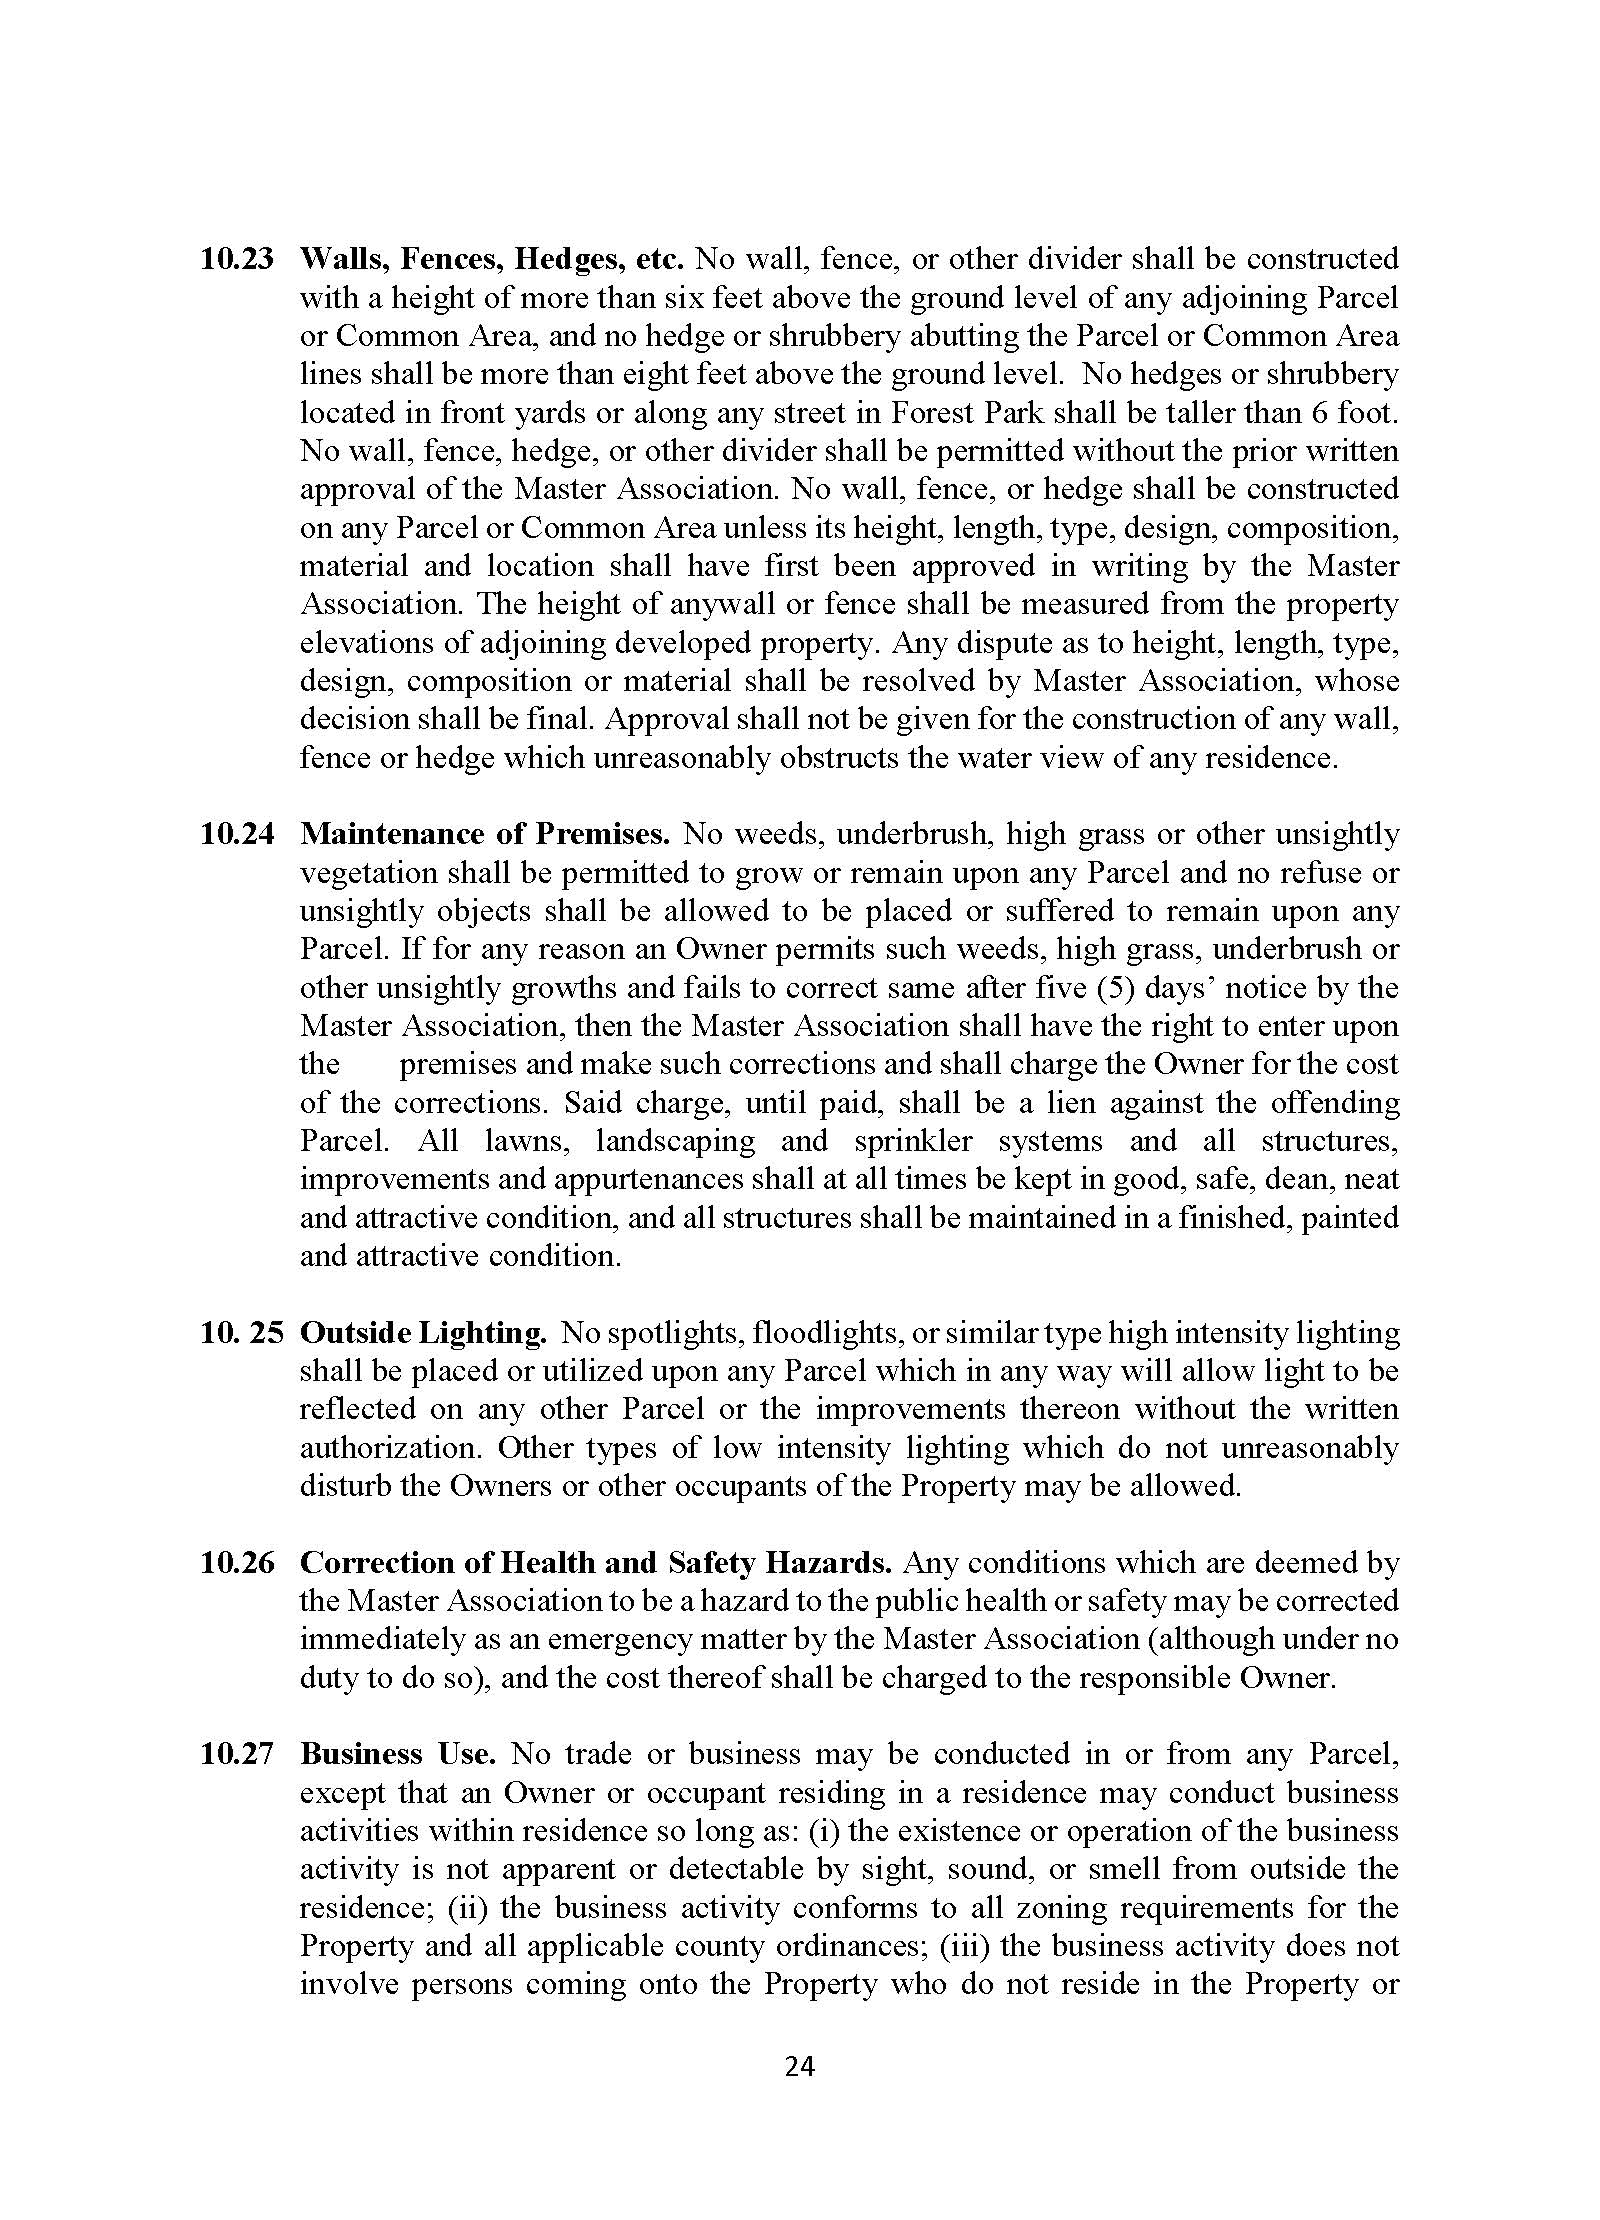 Article 10.X Page 24